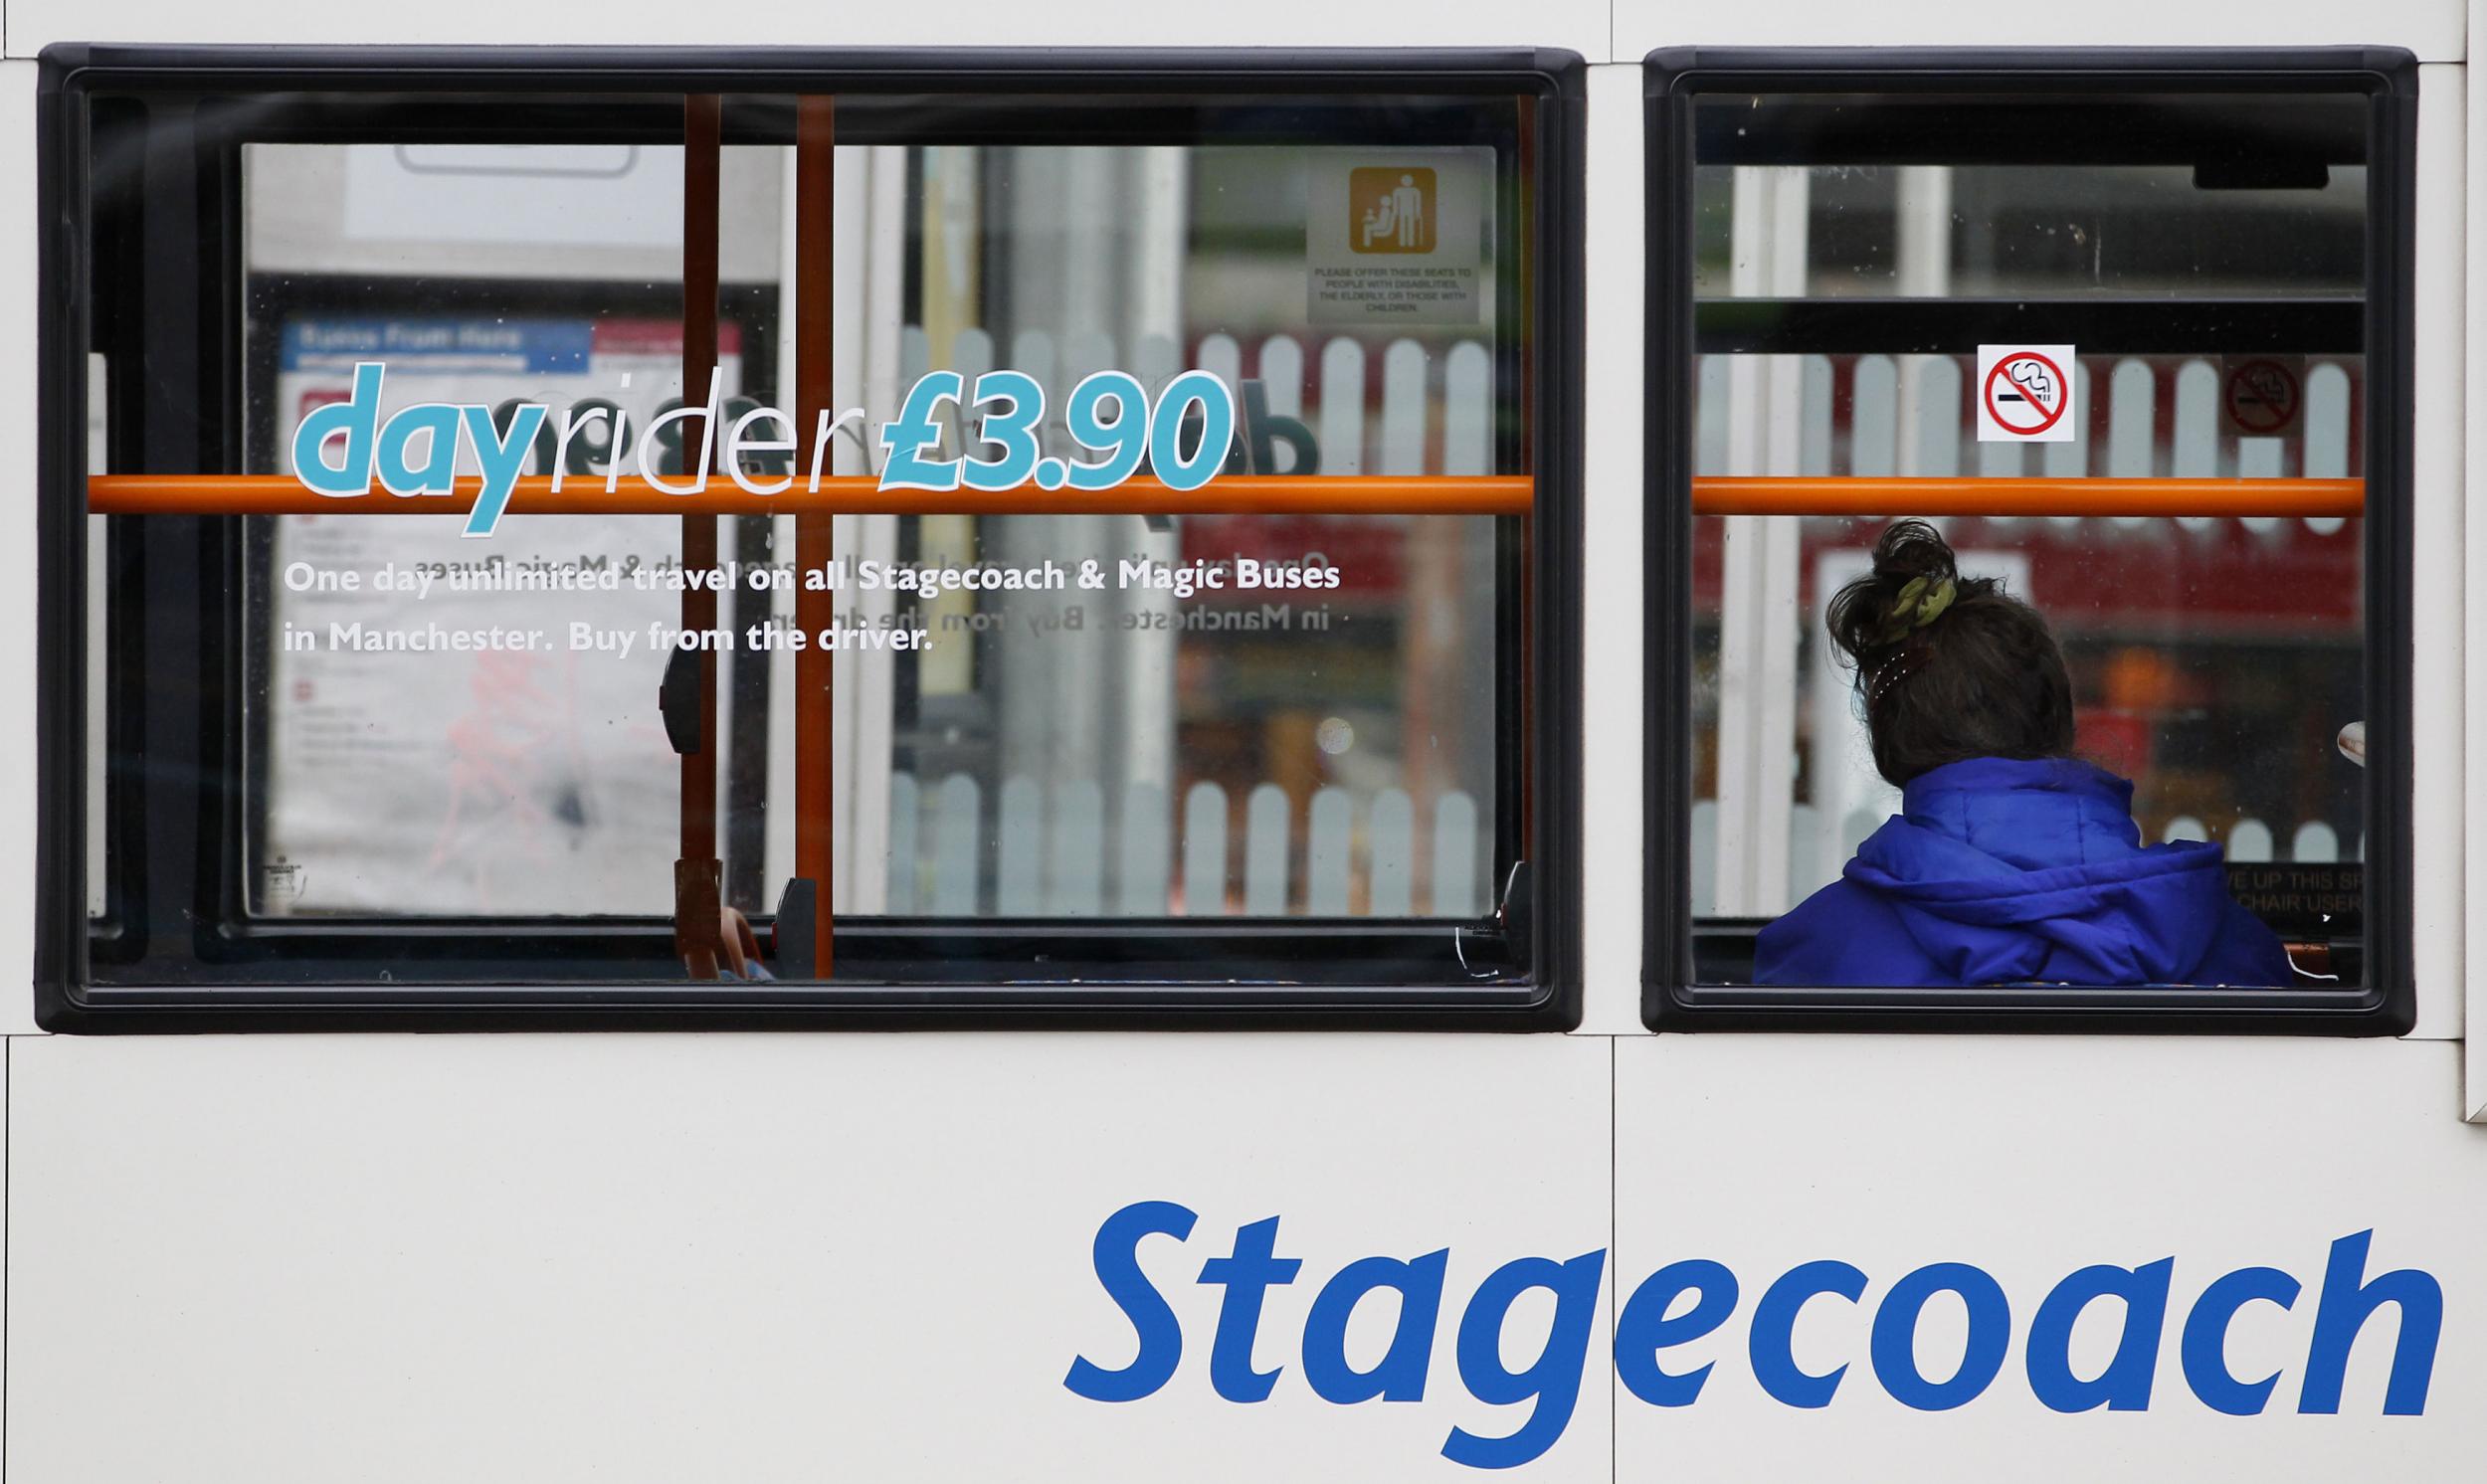 Despite the hit, Stagecoach said it was on track for annual earnings targets